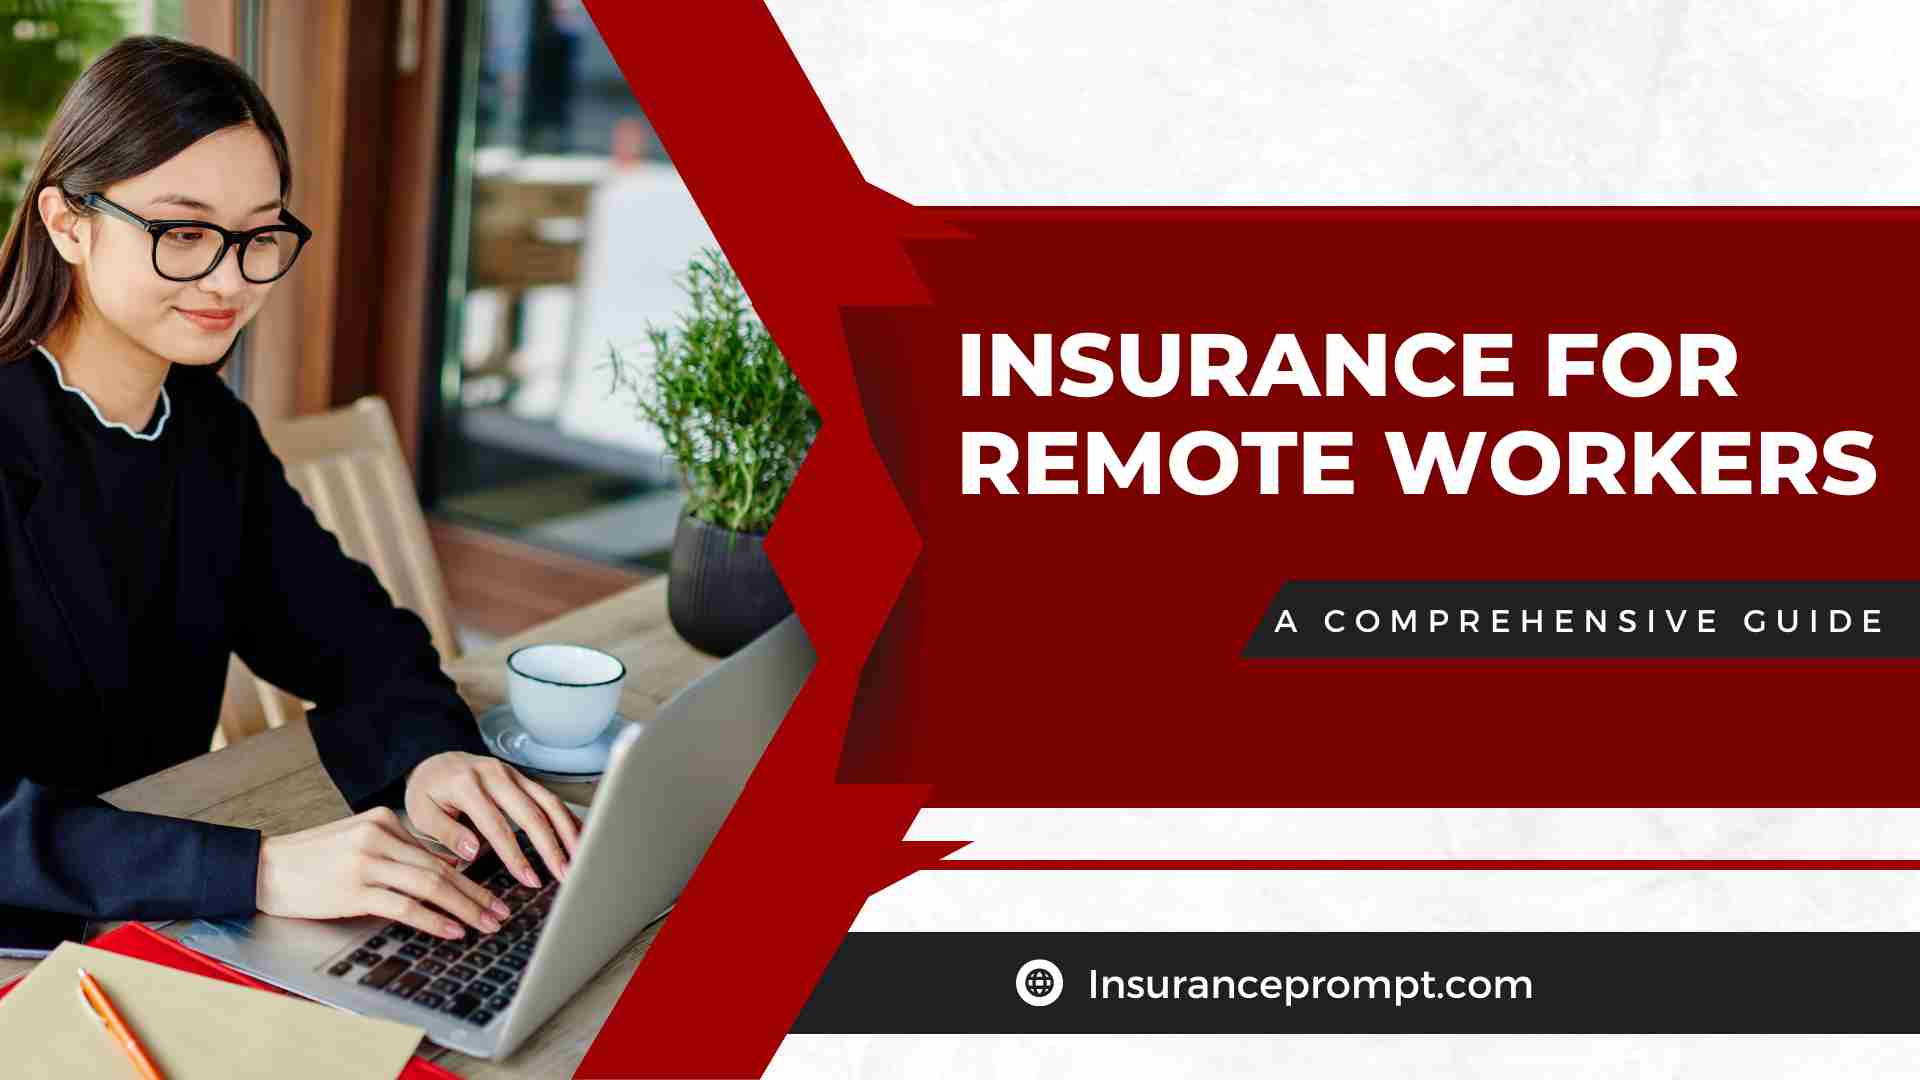 Insurance for Remote Workers